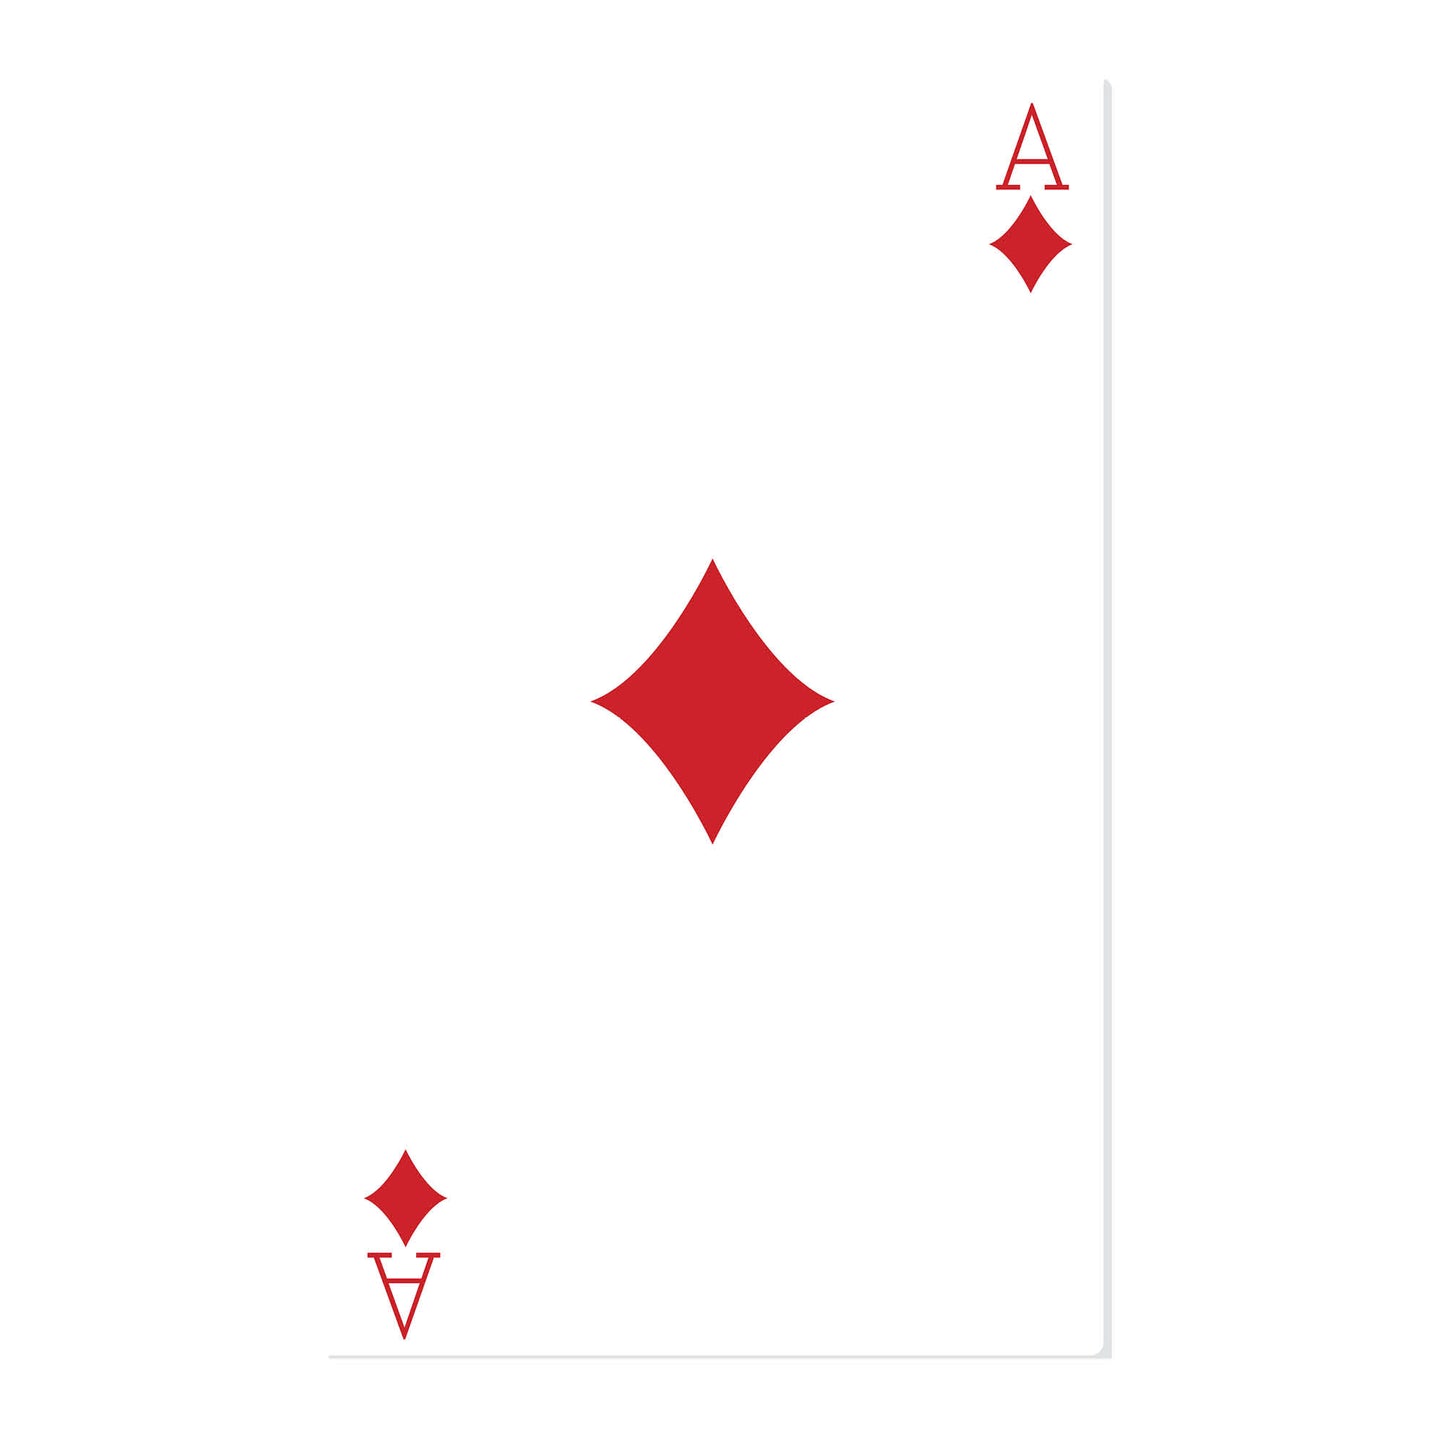 SC025 Ace of Diamonds Playing Card Cardboard Cut Out Height 154cm